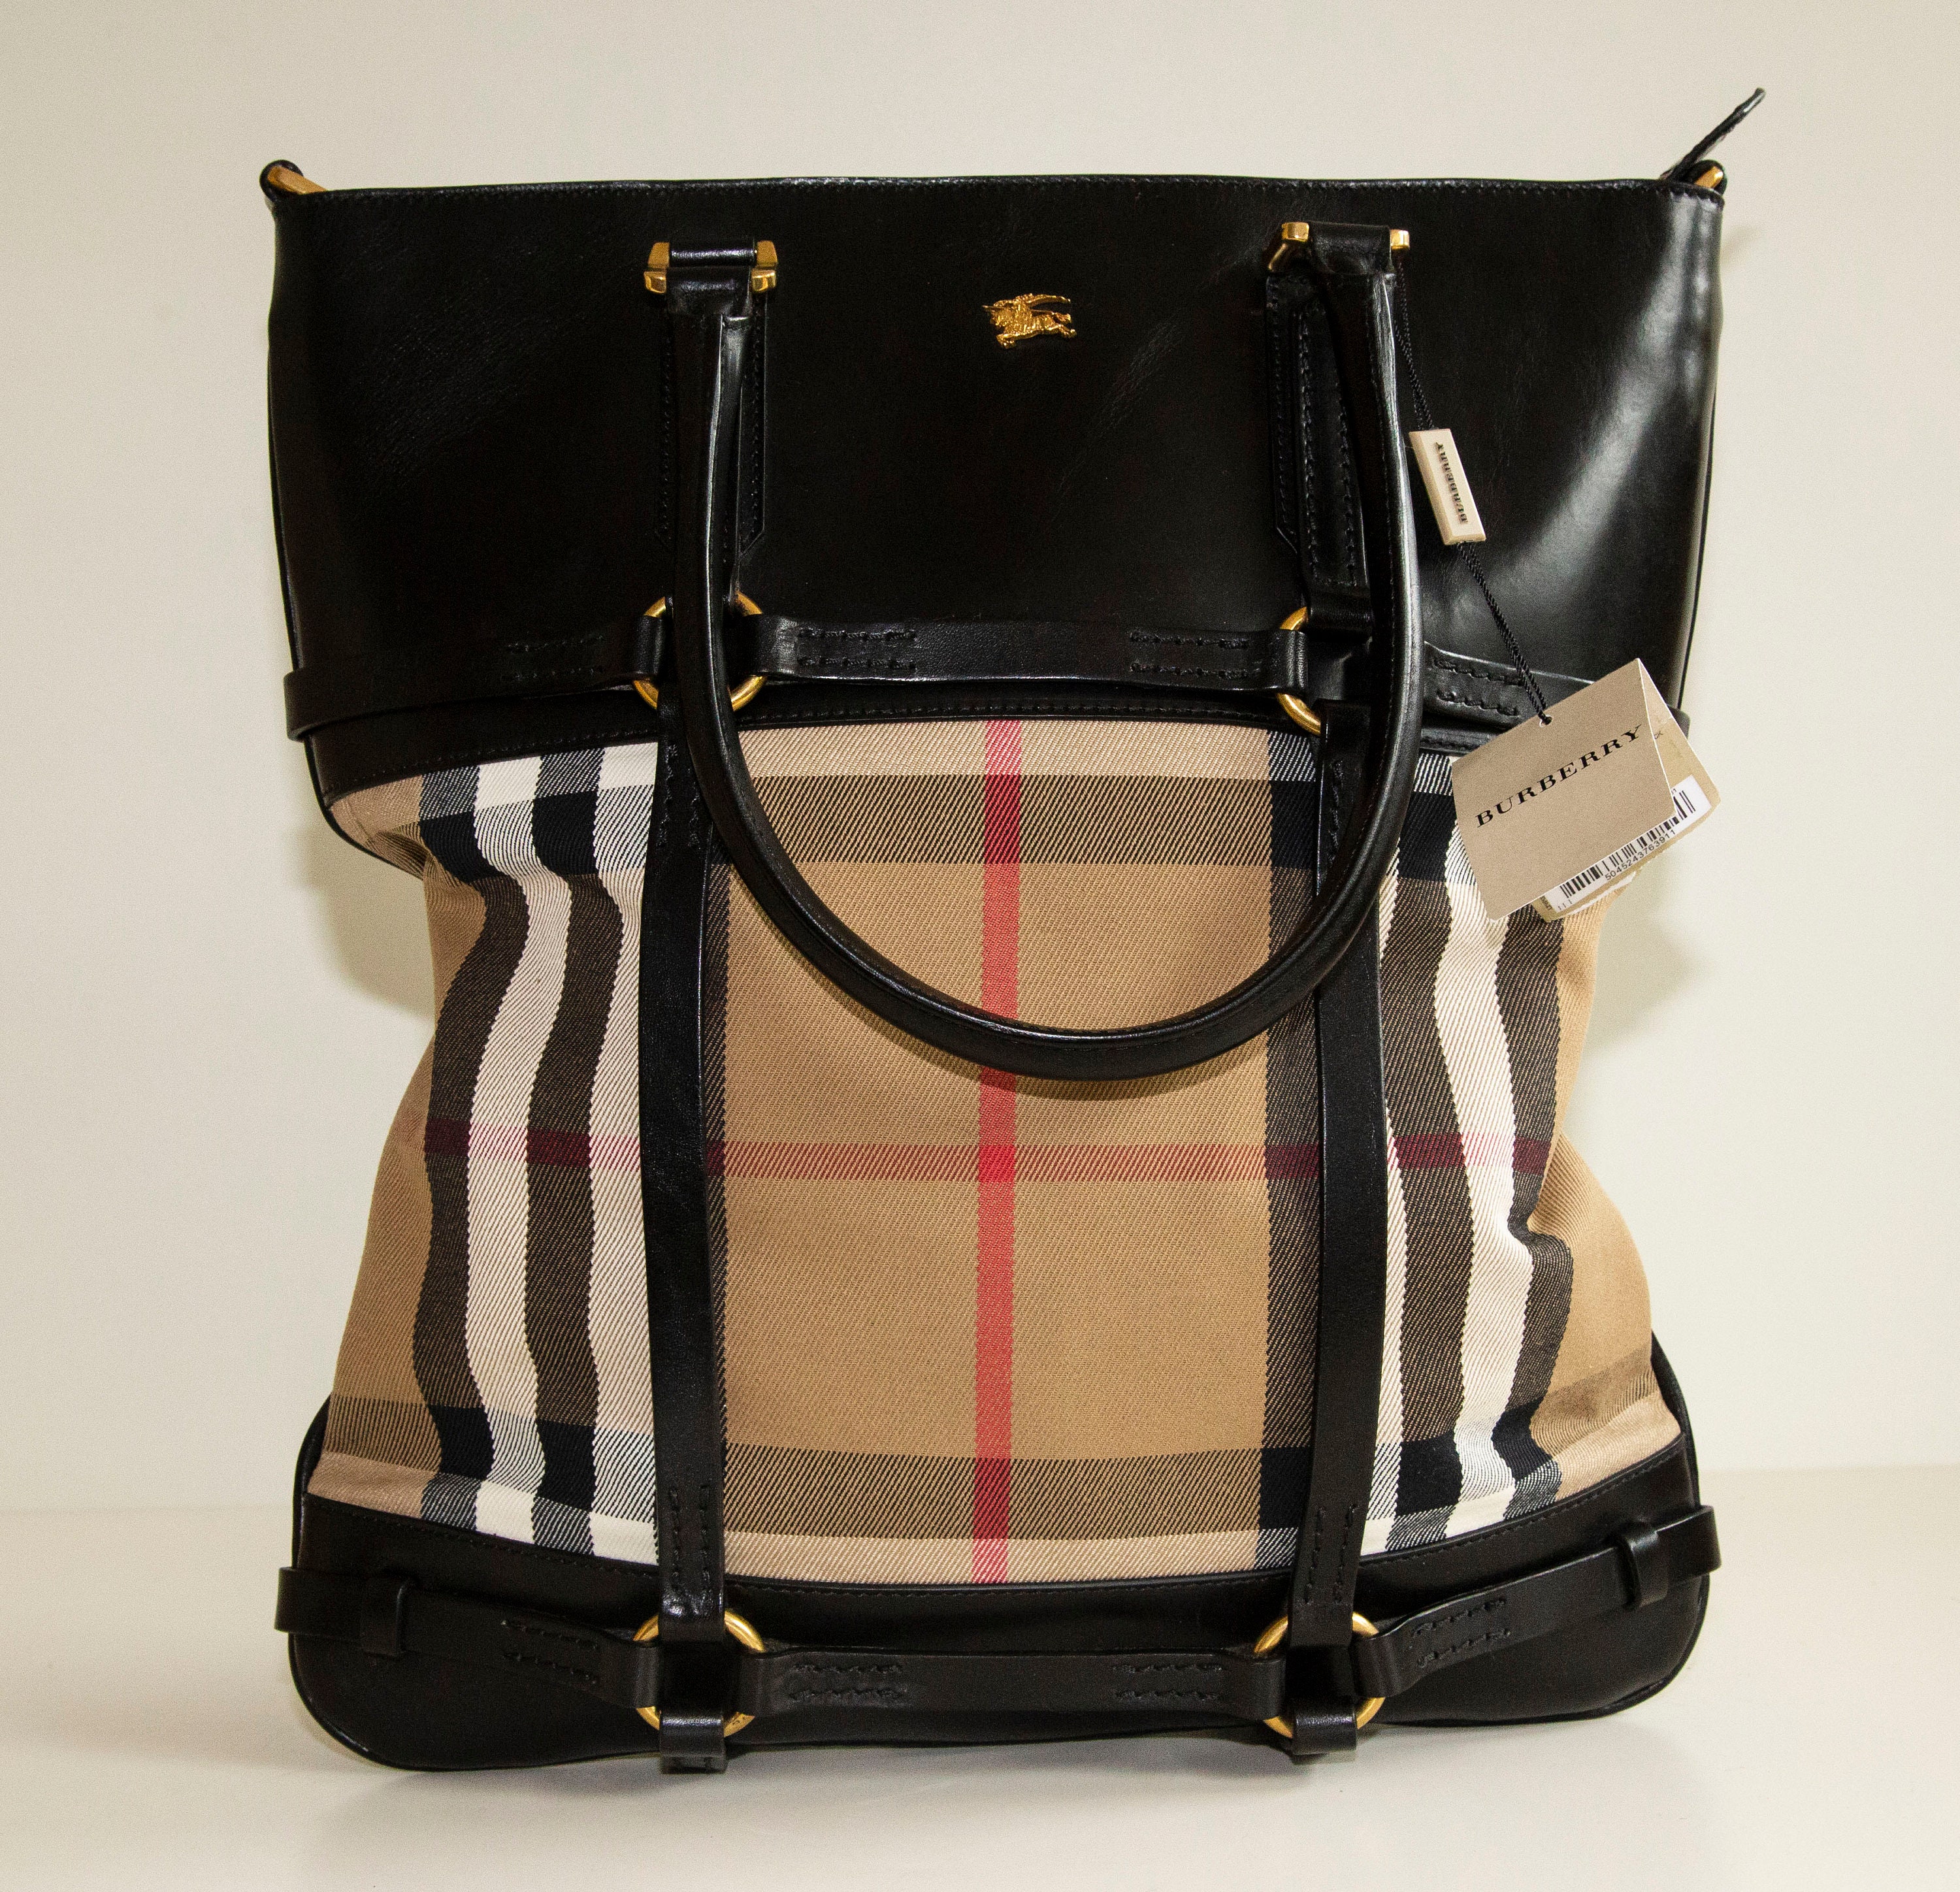 Burberry Bridle House Tote in Very Good Condition -  Israel